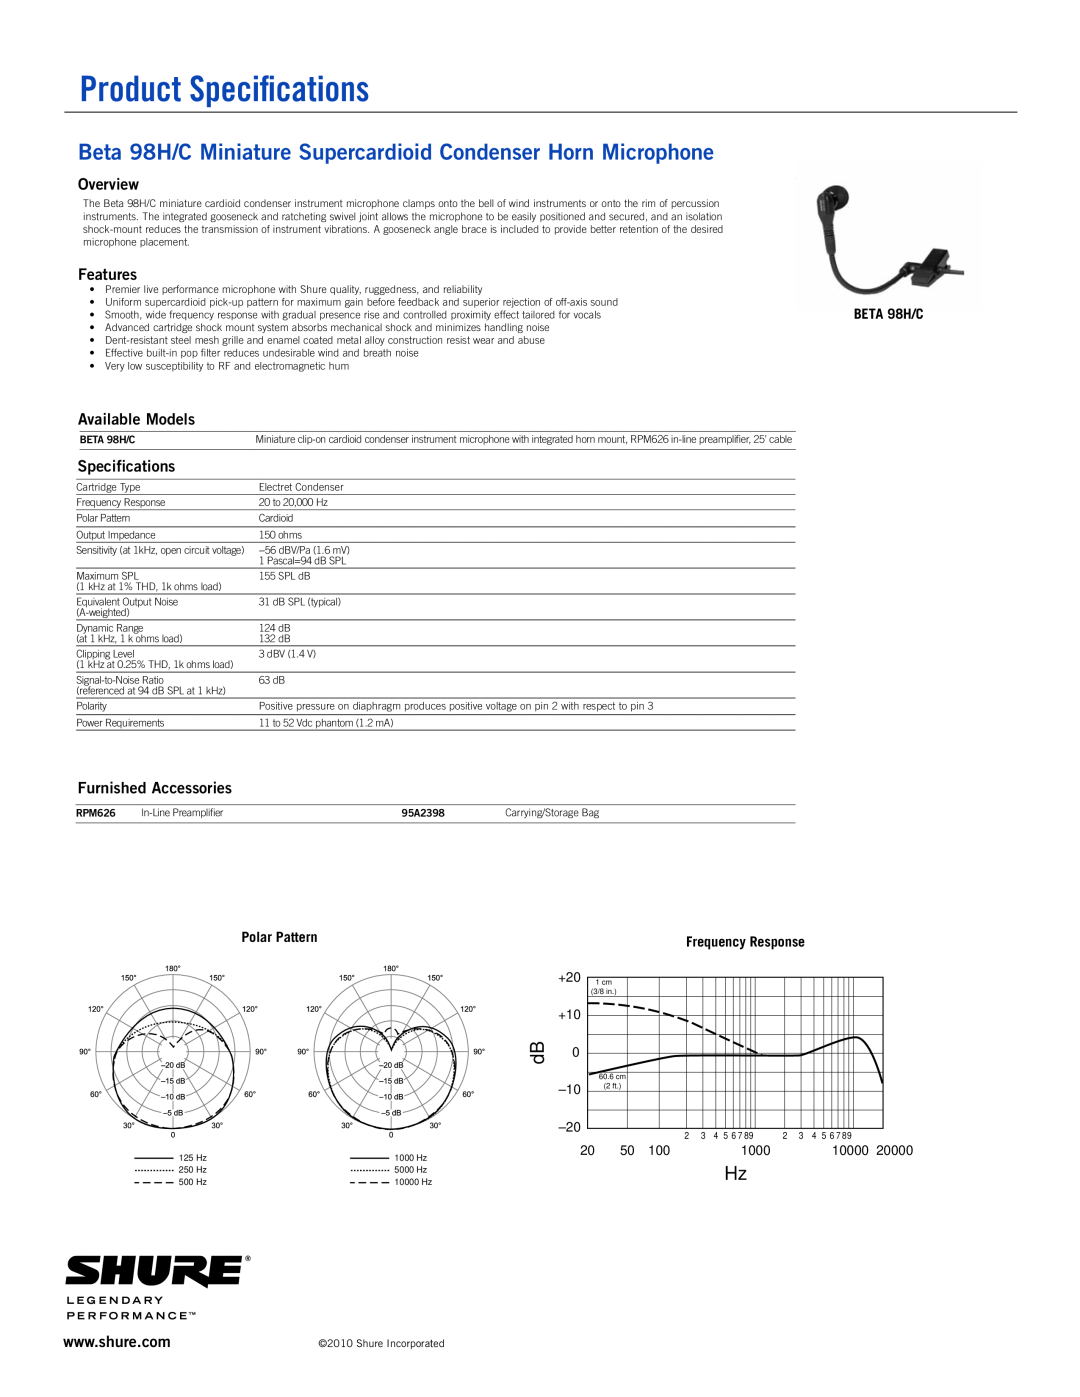 Shure specifications Product Specifications, Beta 98H/C Miniature Supercardioid Condenser Horn Microphone, Overview 